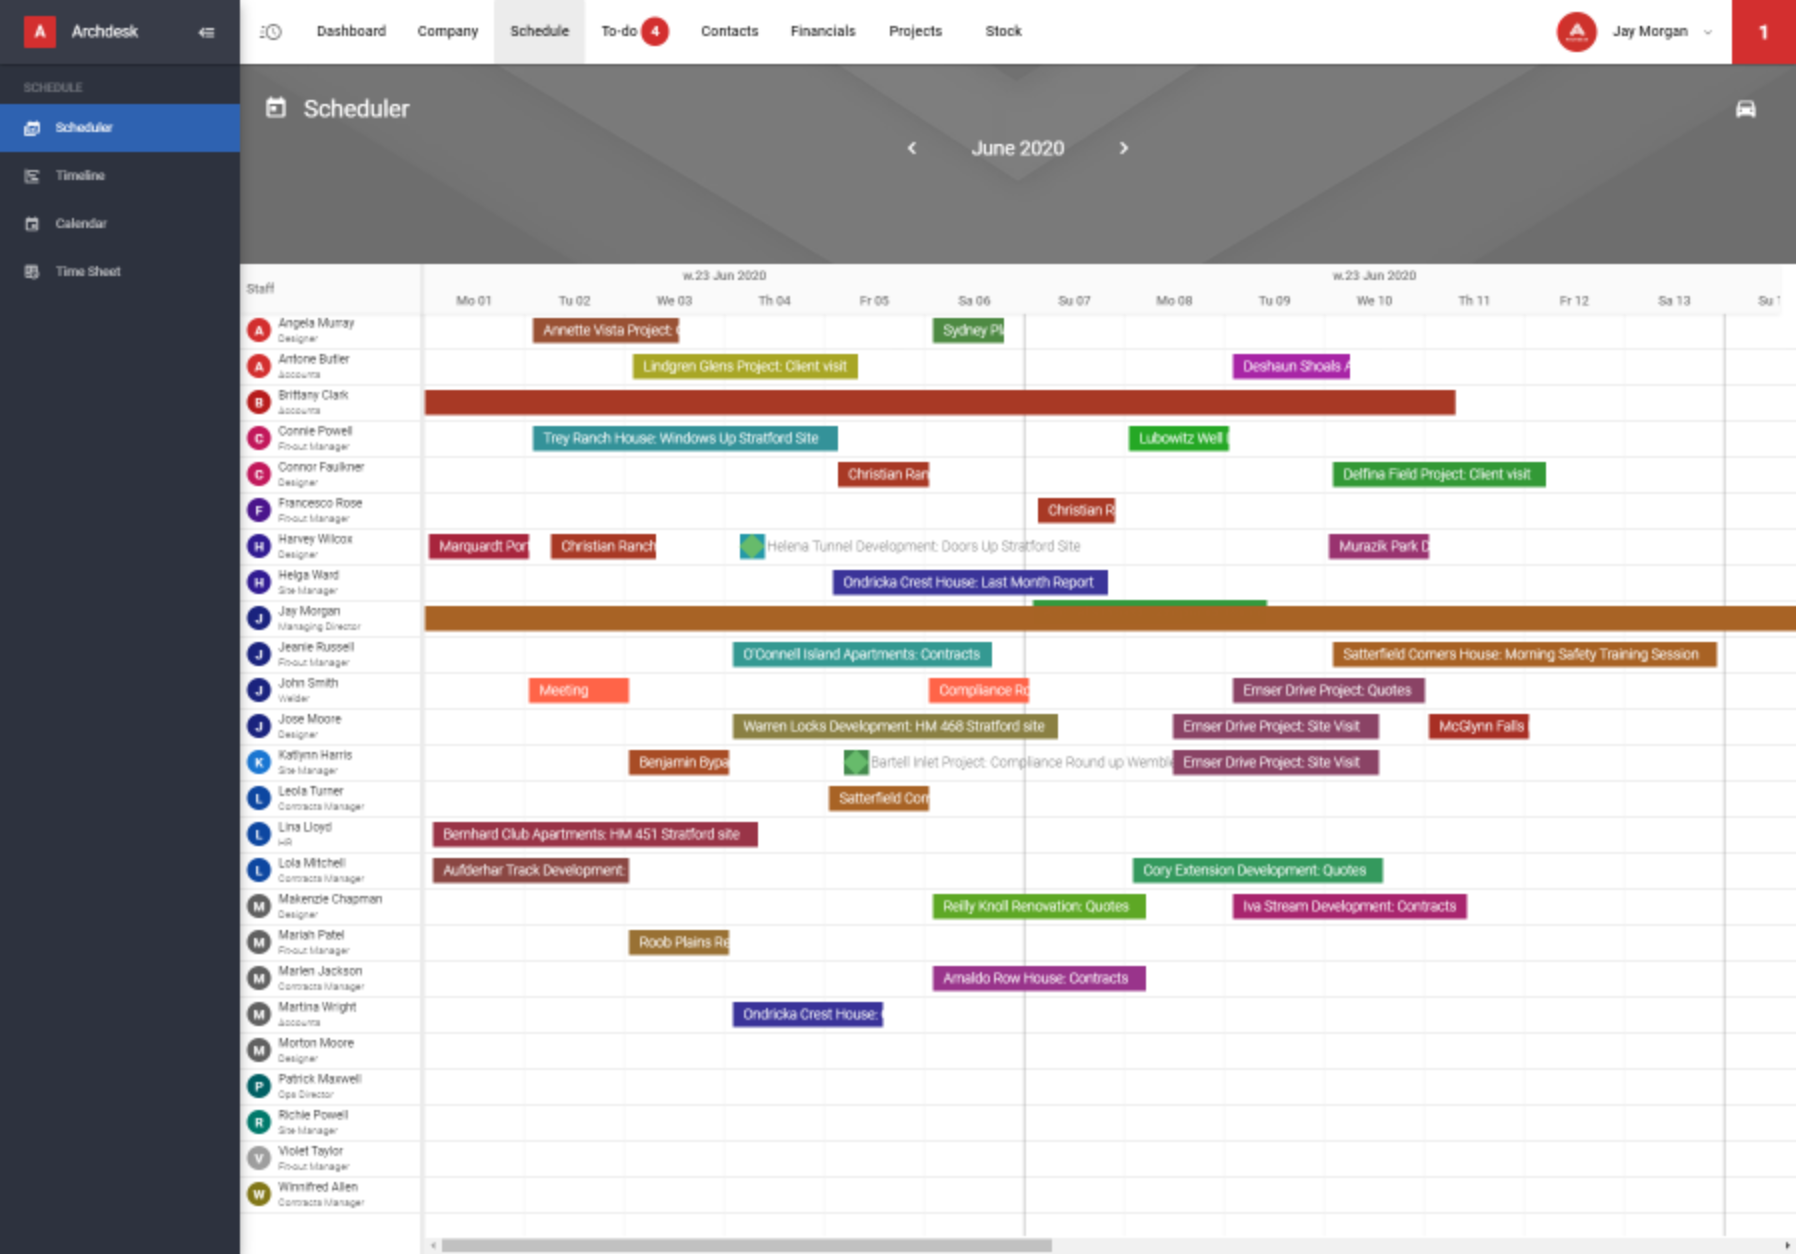 View on a project schedule in Archdesk construction management software